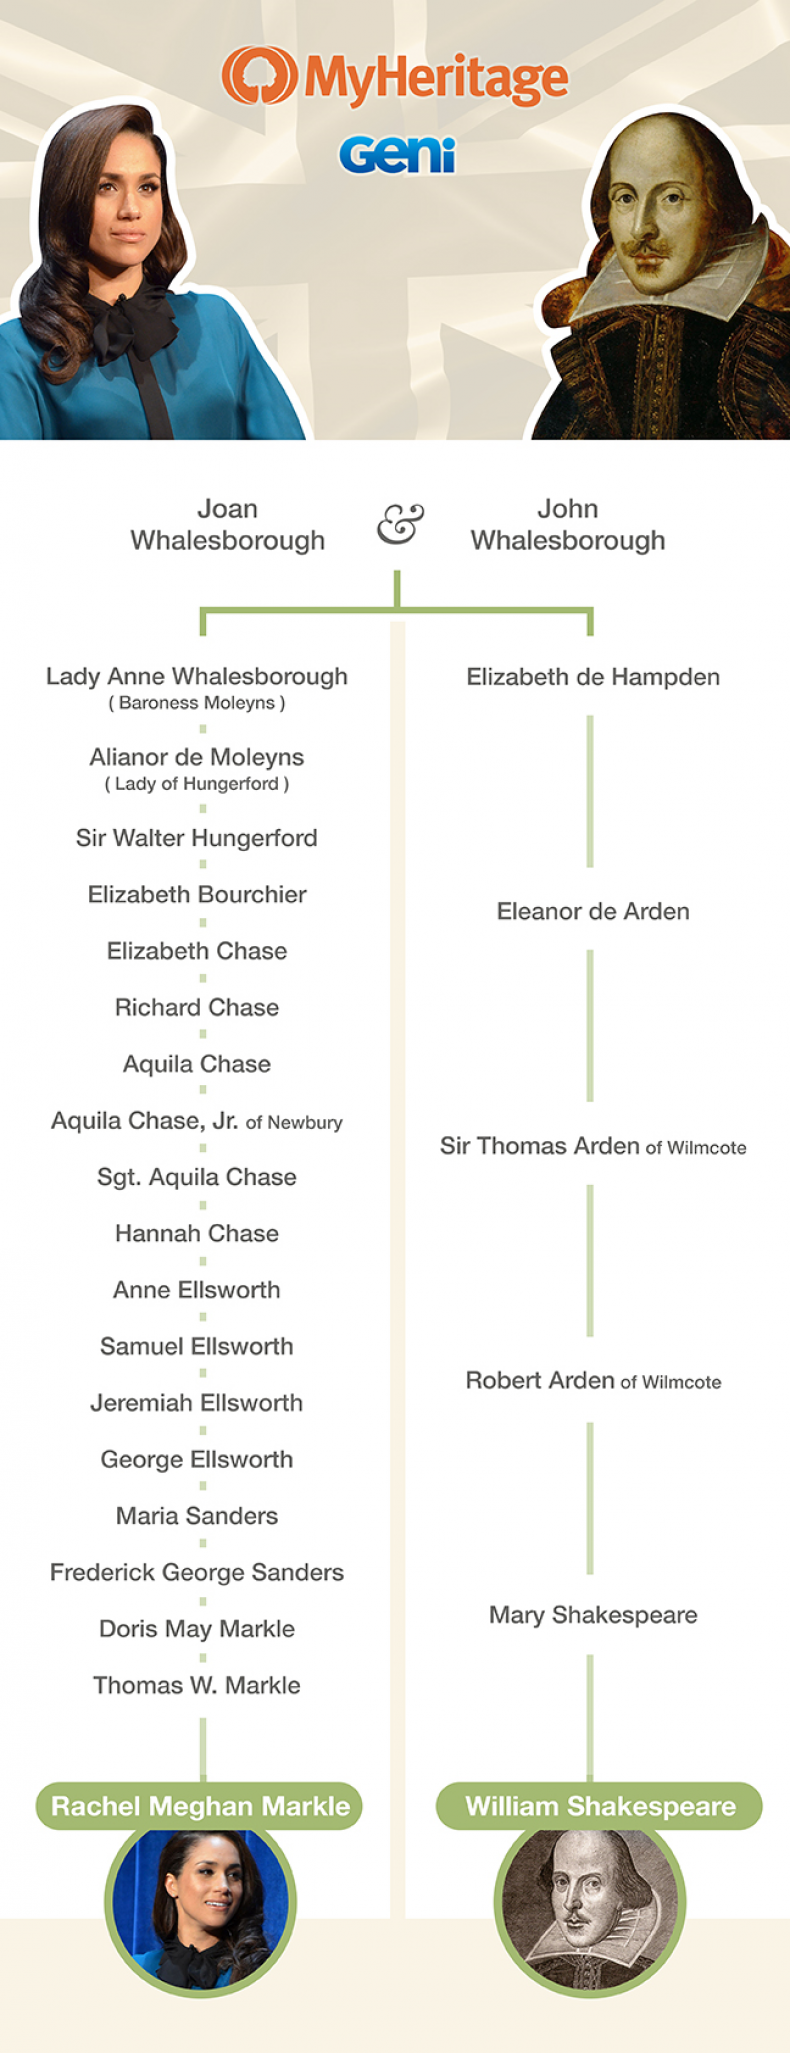 Meghan Markle and Shakespeare family tree